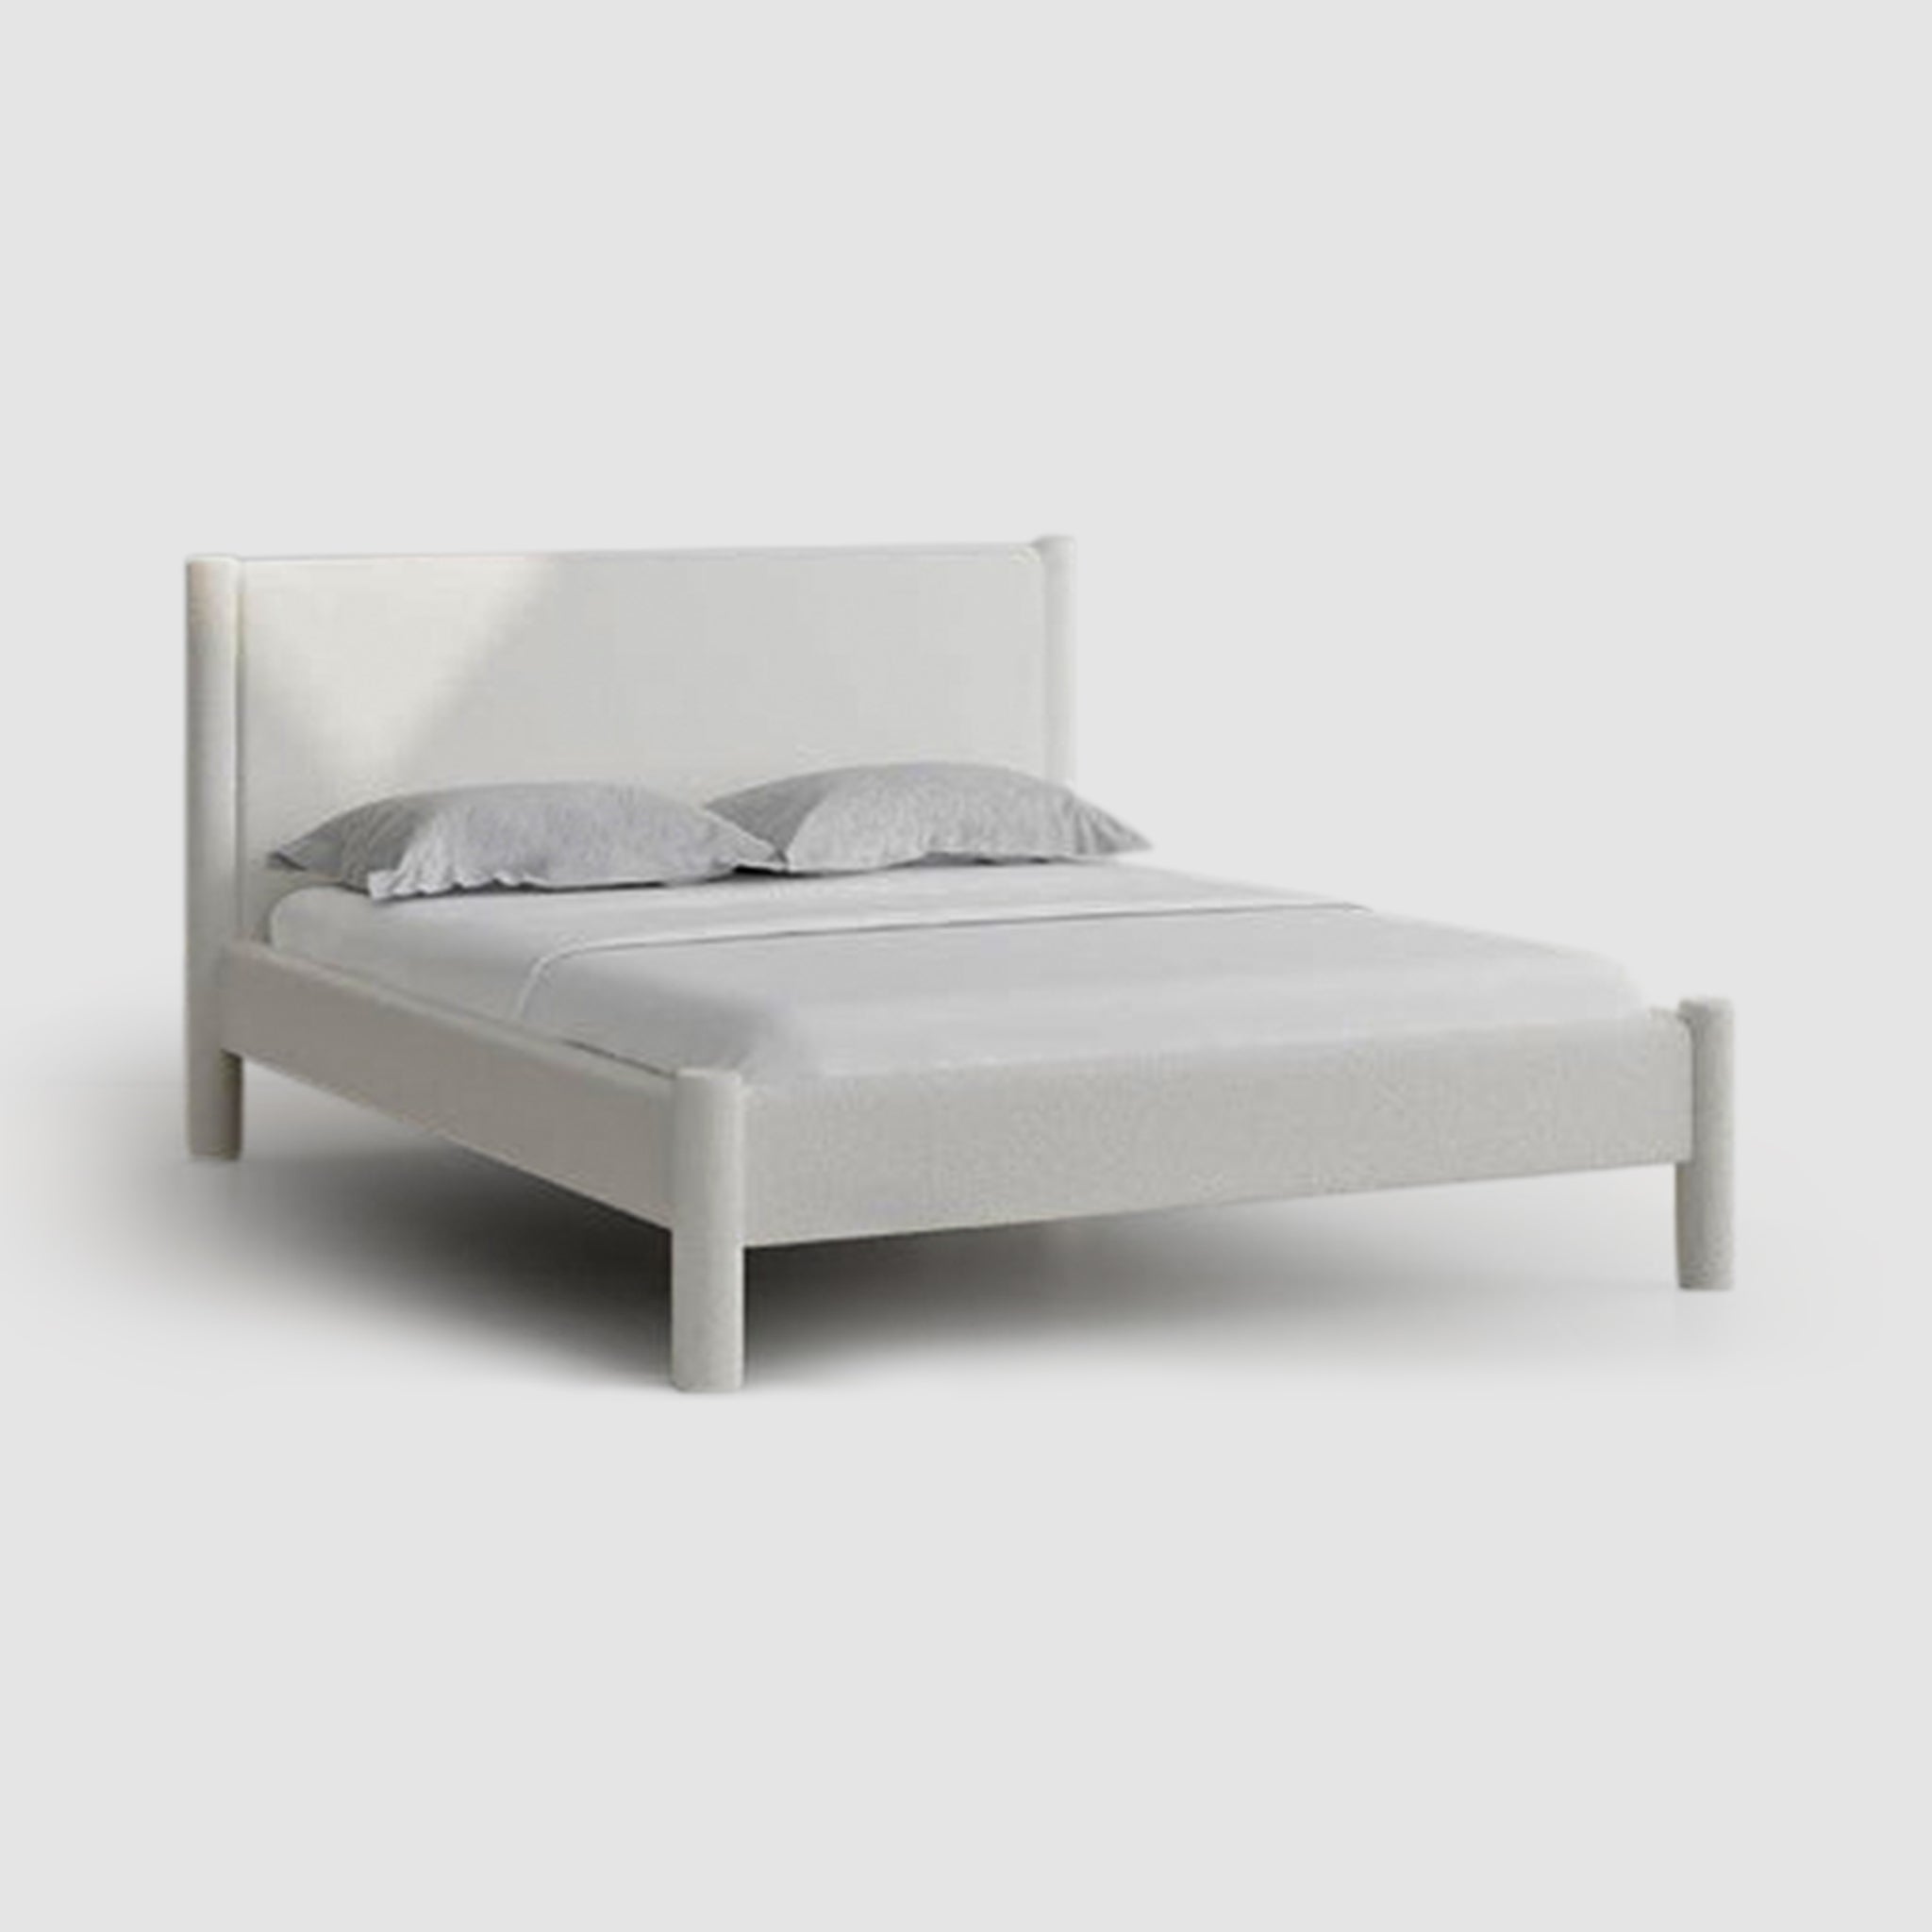 Elegant Carrie Bed with solid beech wood foundation, ideal for restful nights.